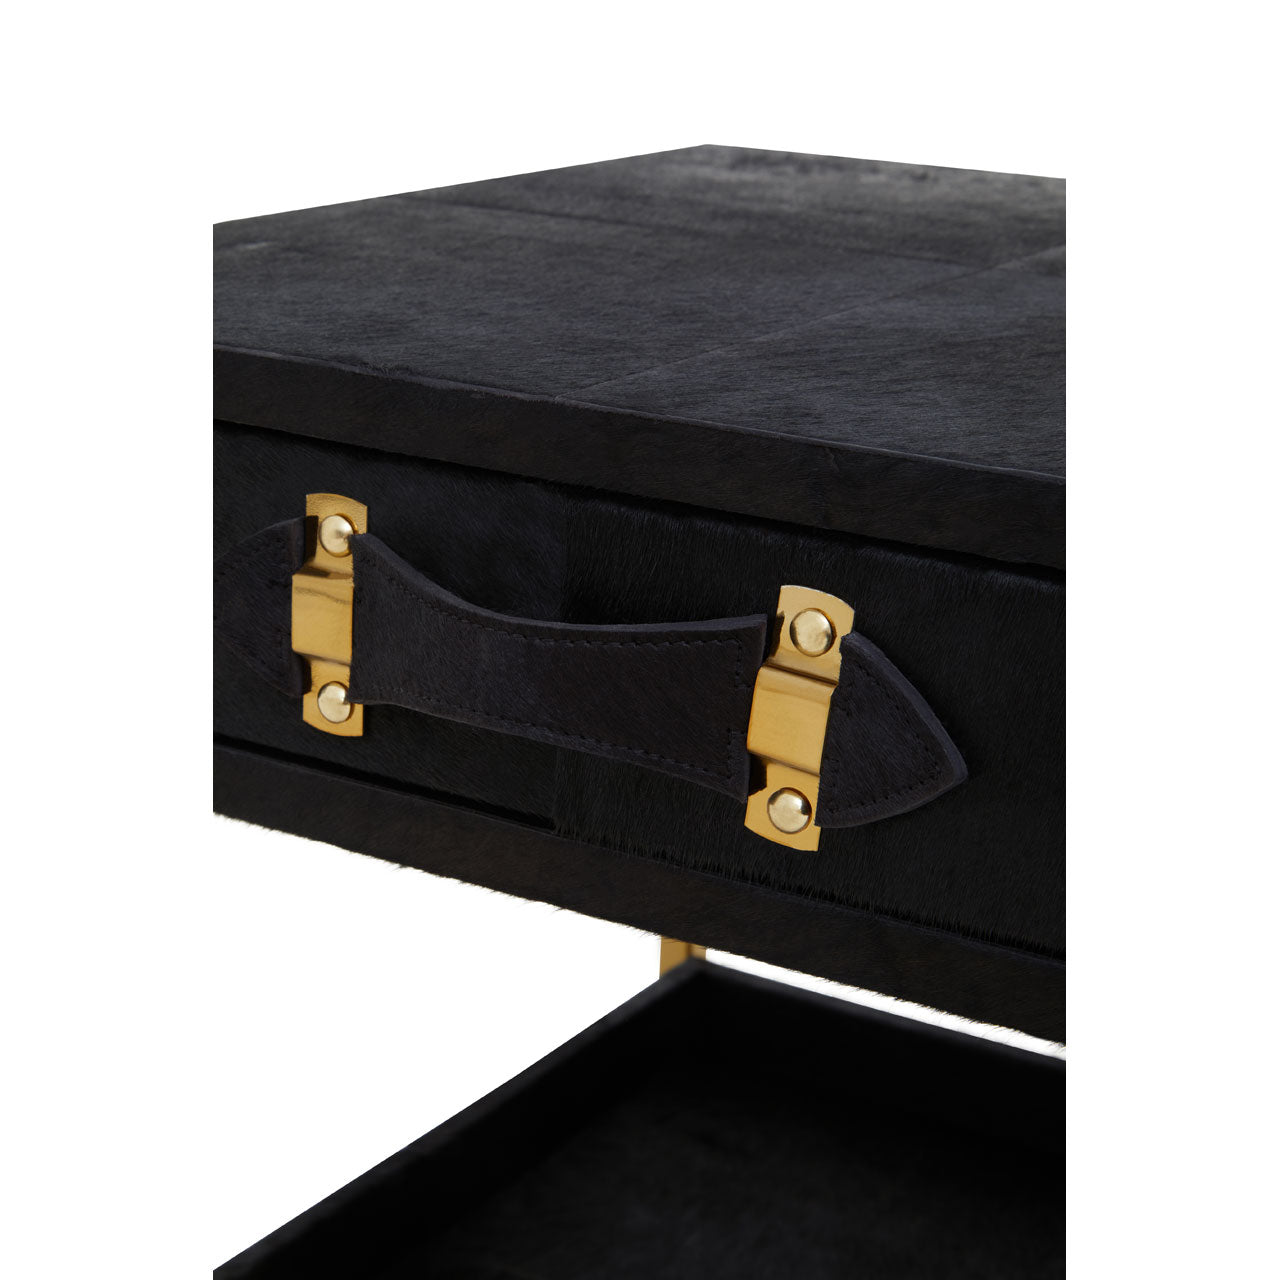 Kensington Townhouse Hair On Hide Black And Gold Bedside Table